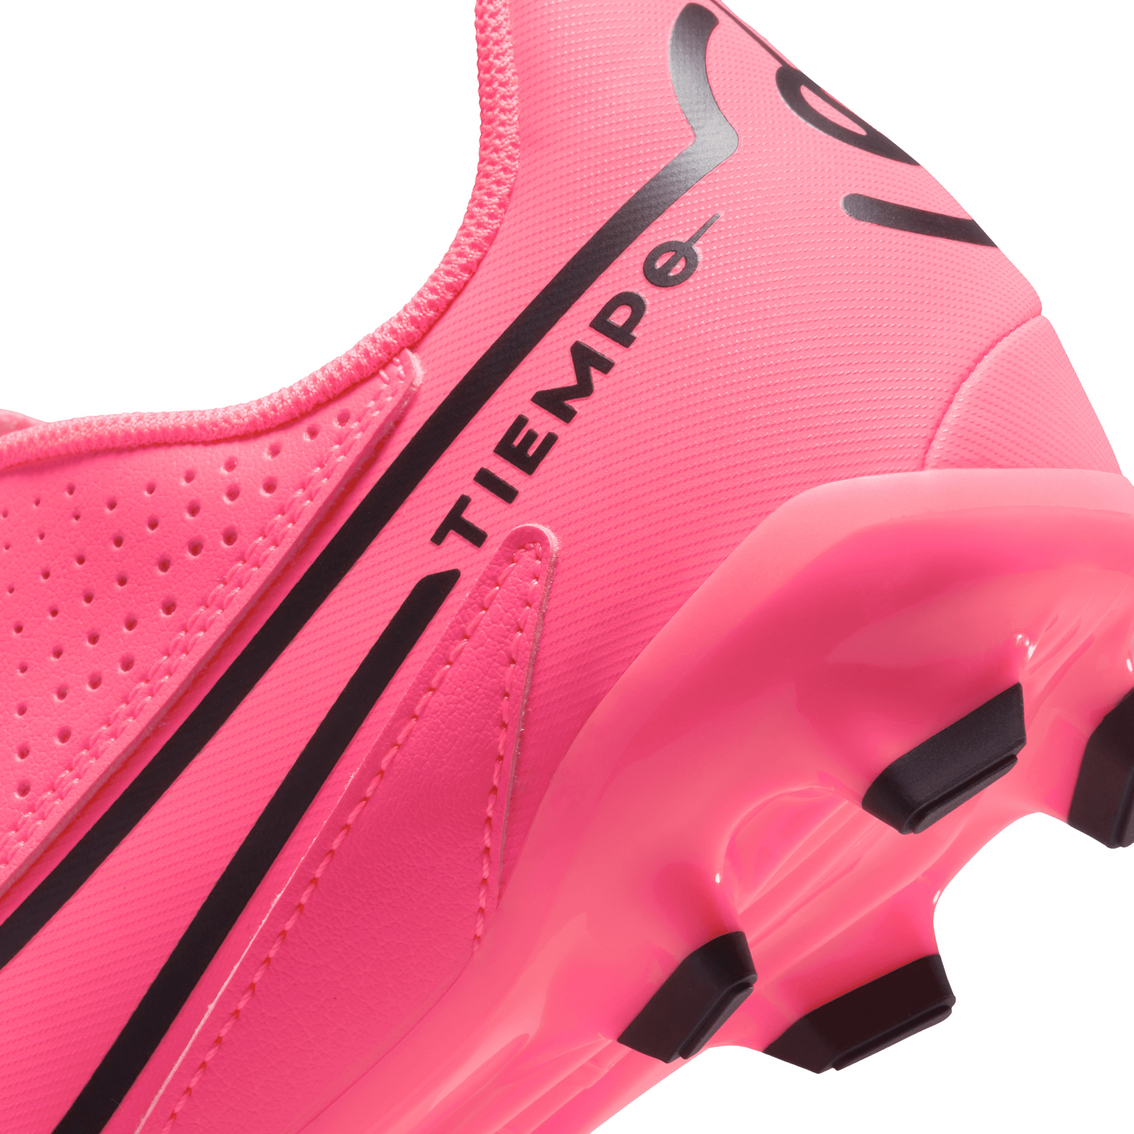 Nike Girls Jr Tiempo 9 Club Firm Ground and Multi Ground Soccer Cleats - Image 8 of 9